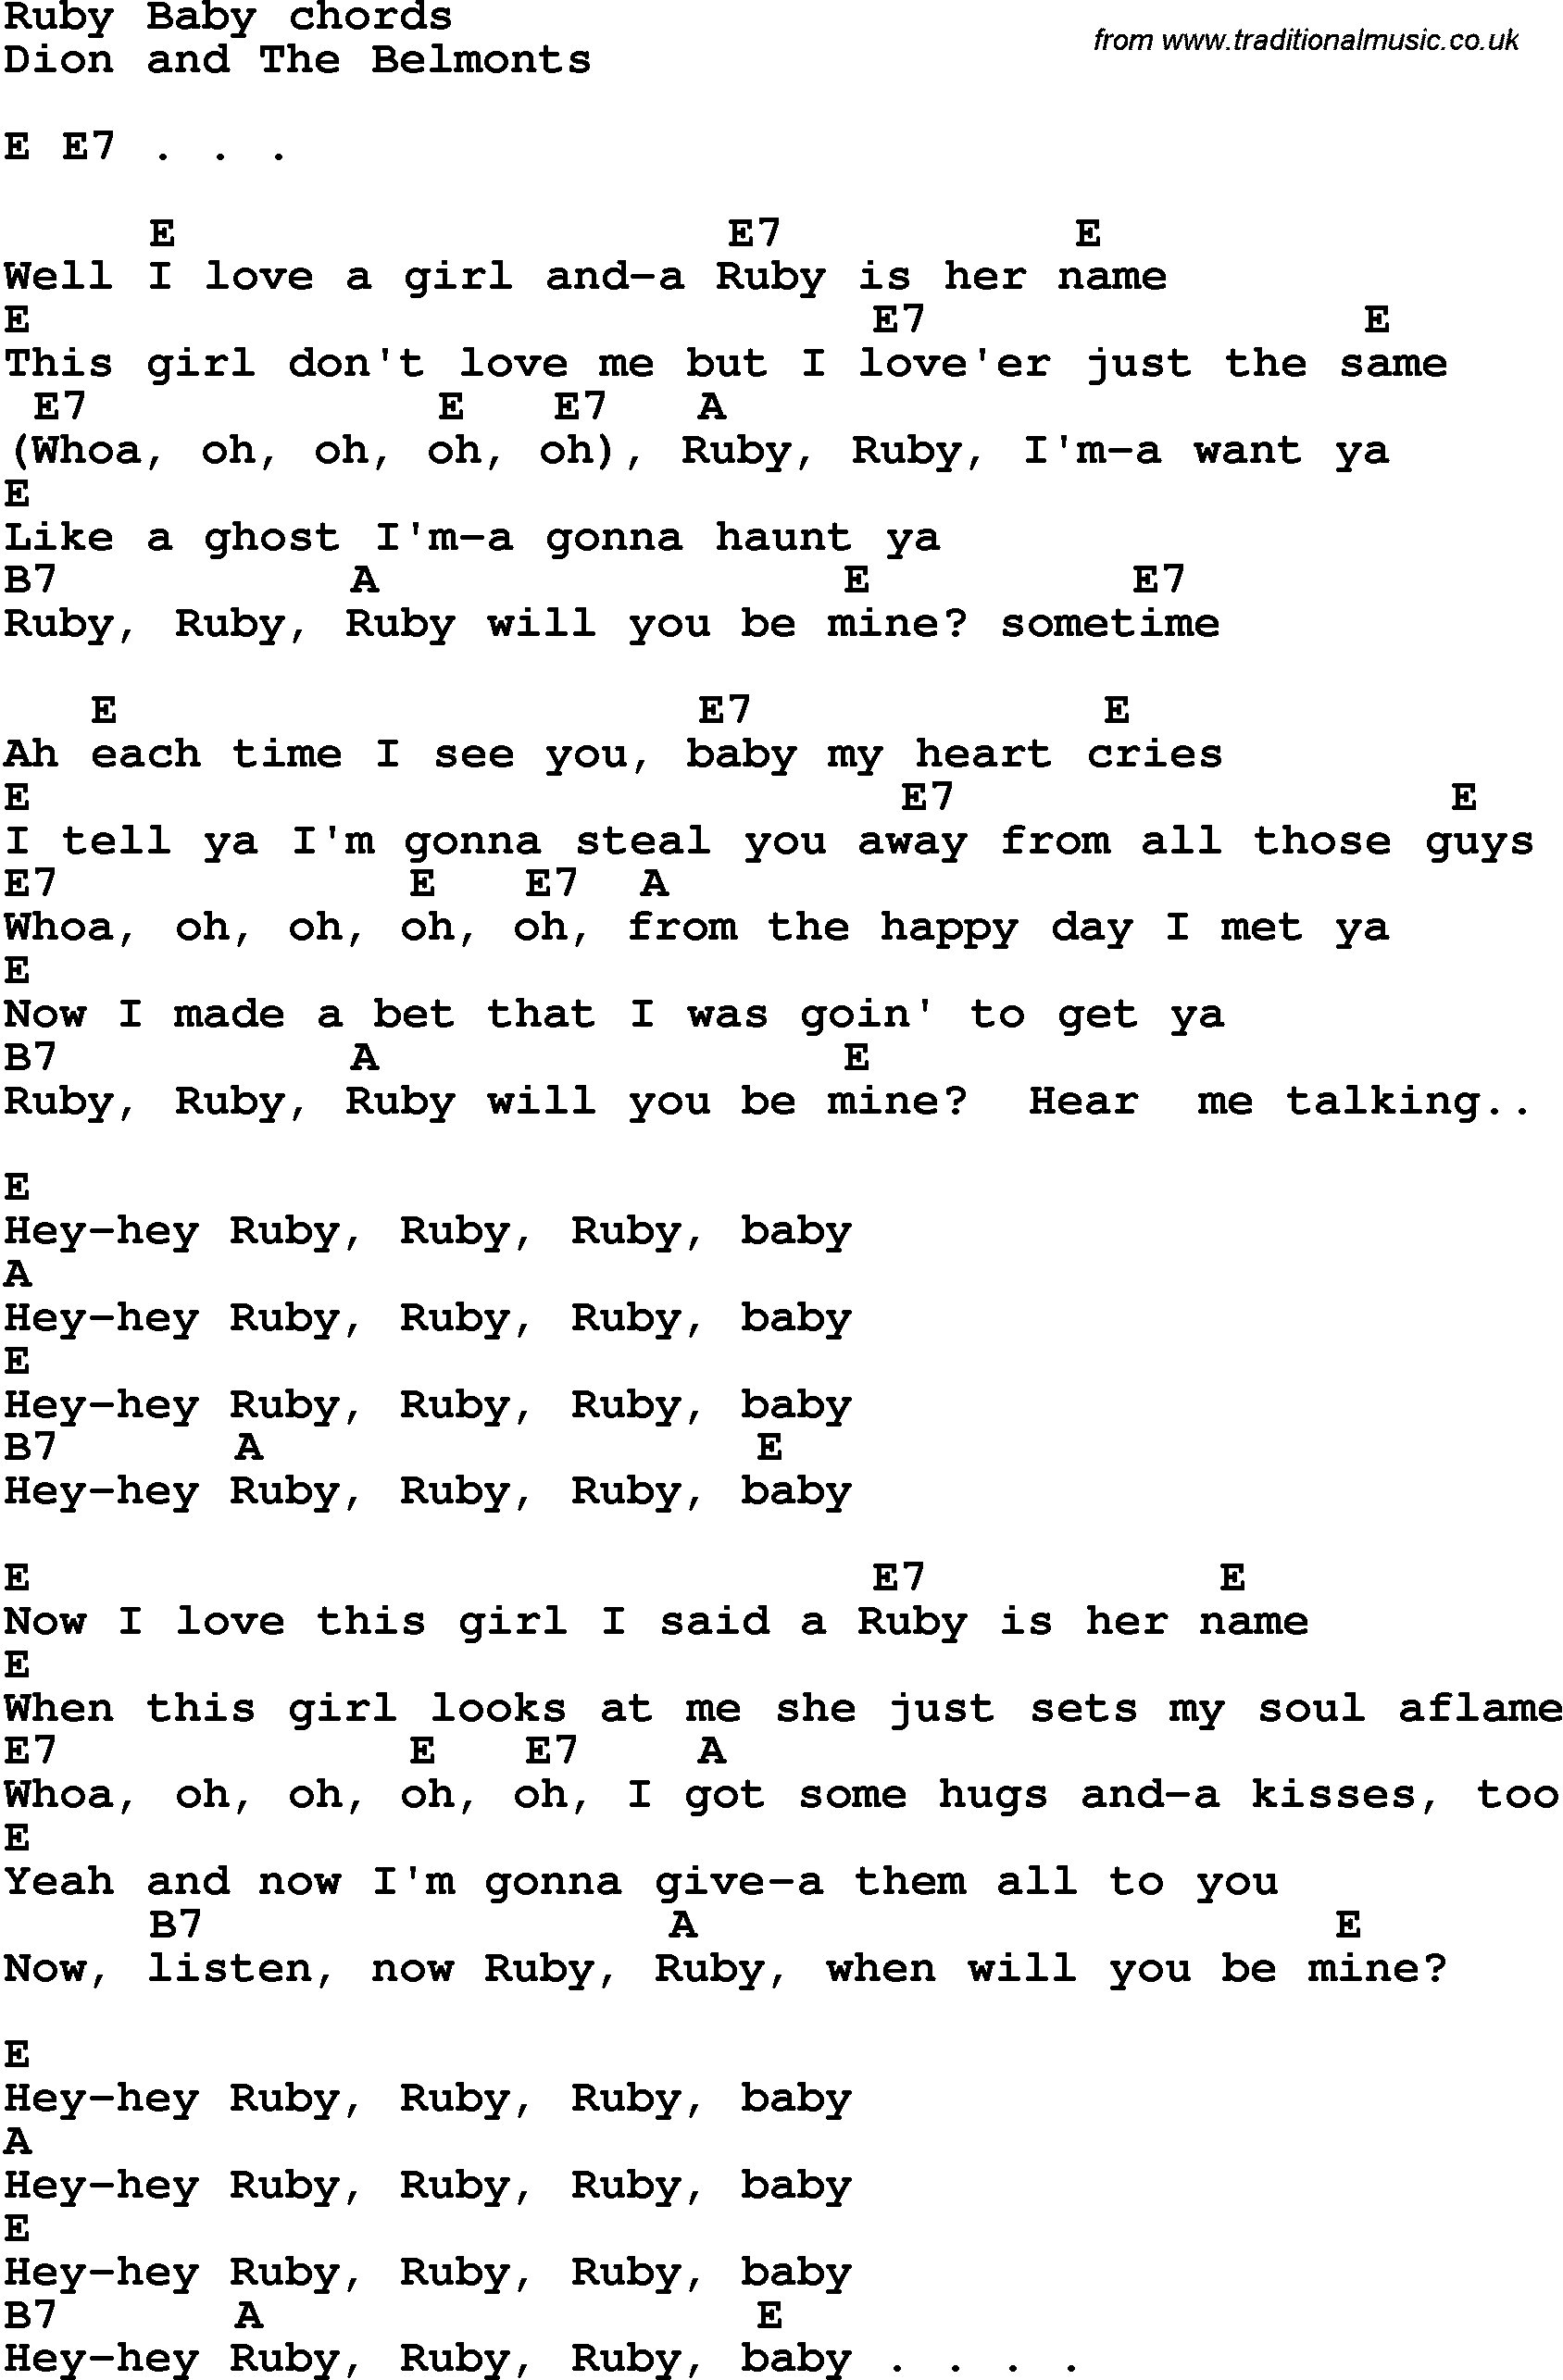 Song Lyrics with guitar chords for Ruby Baby